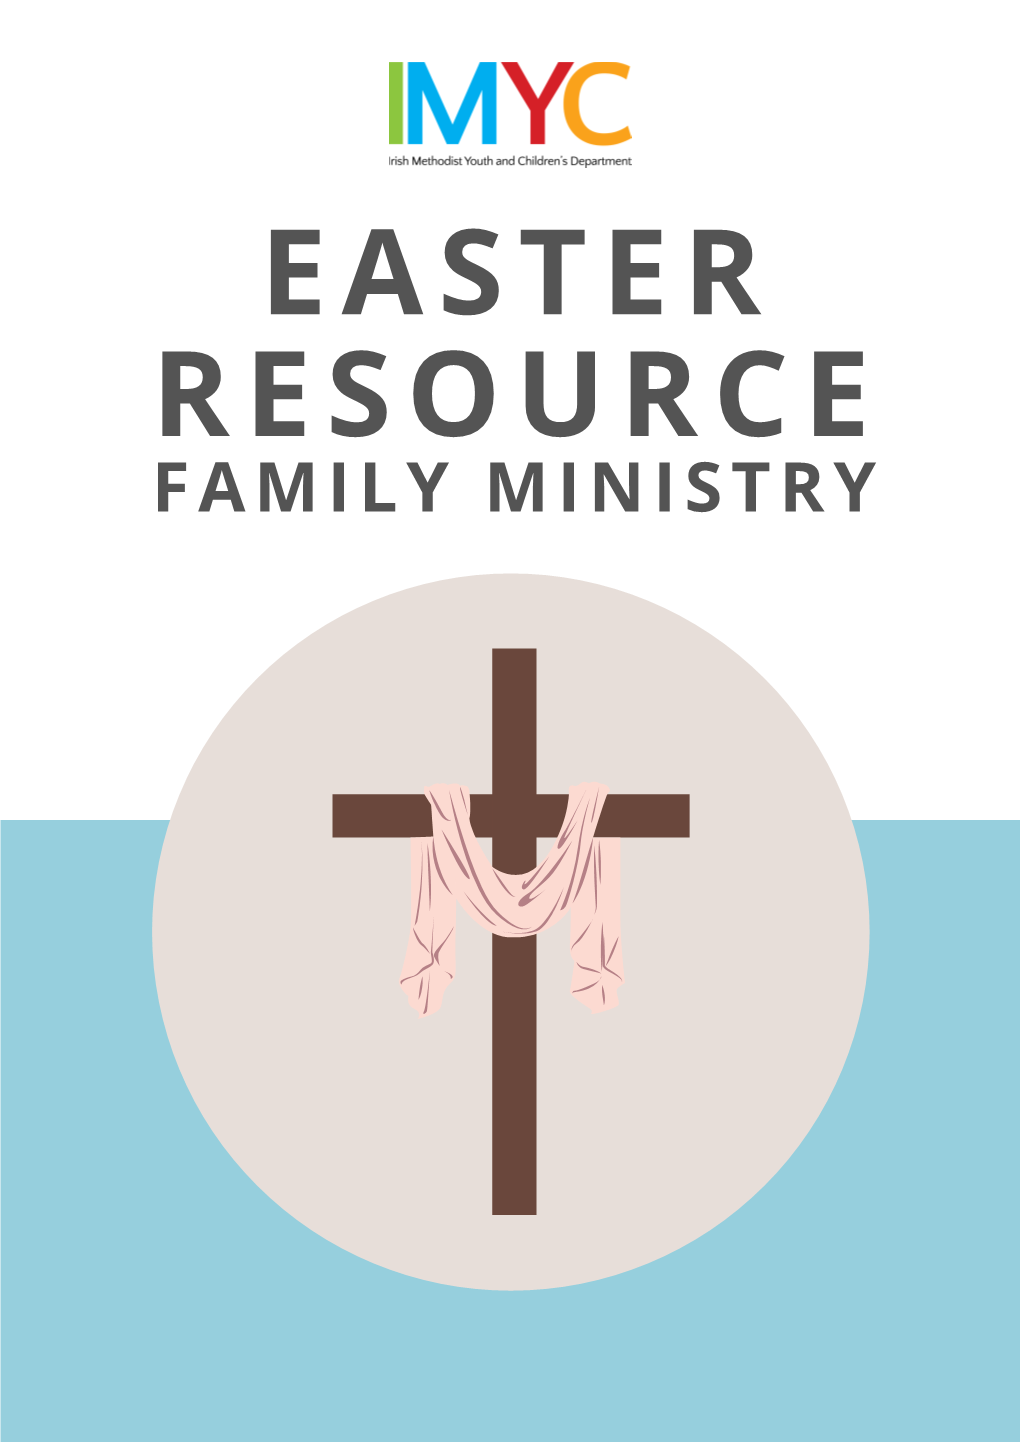 Copy of EASTER RESOURCE